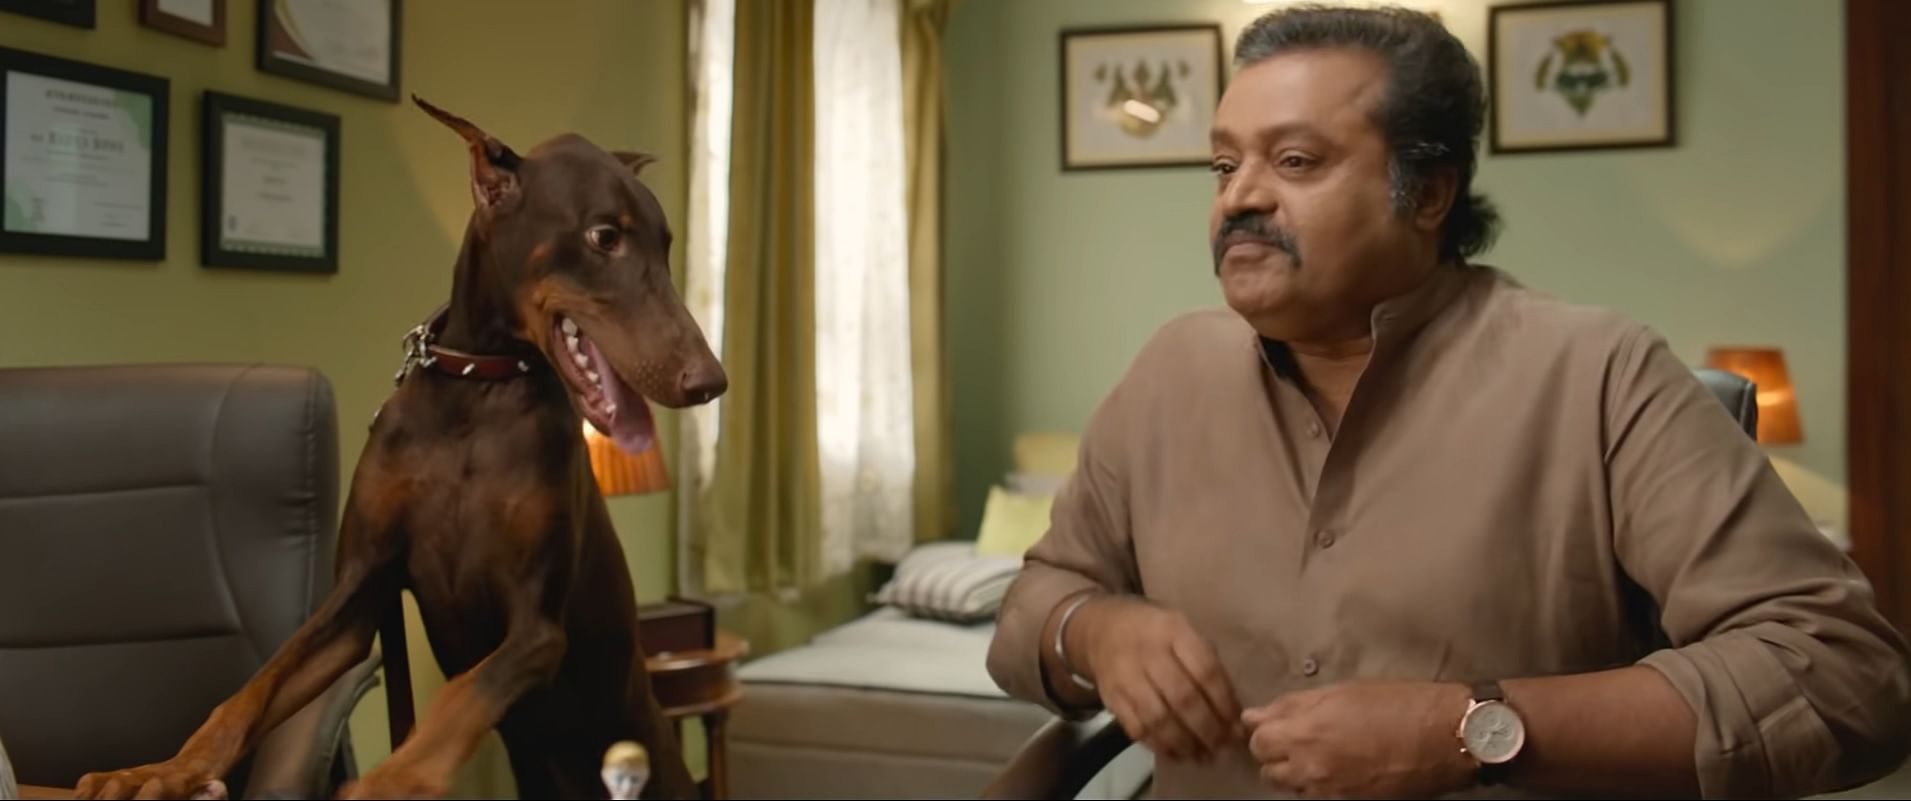 Suresh Gopi names the dog Prabhakara in 'Varane Avishaymundu', which led to hate messages and abuses to the filmmakers.